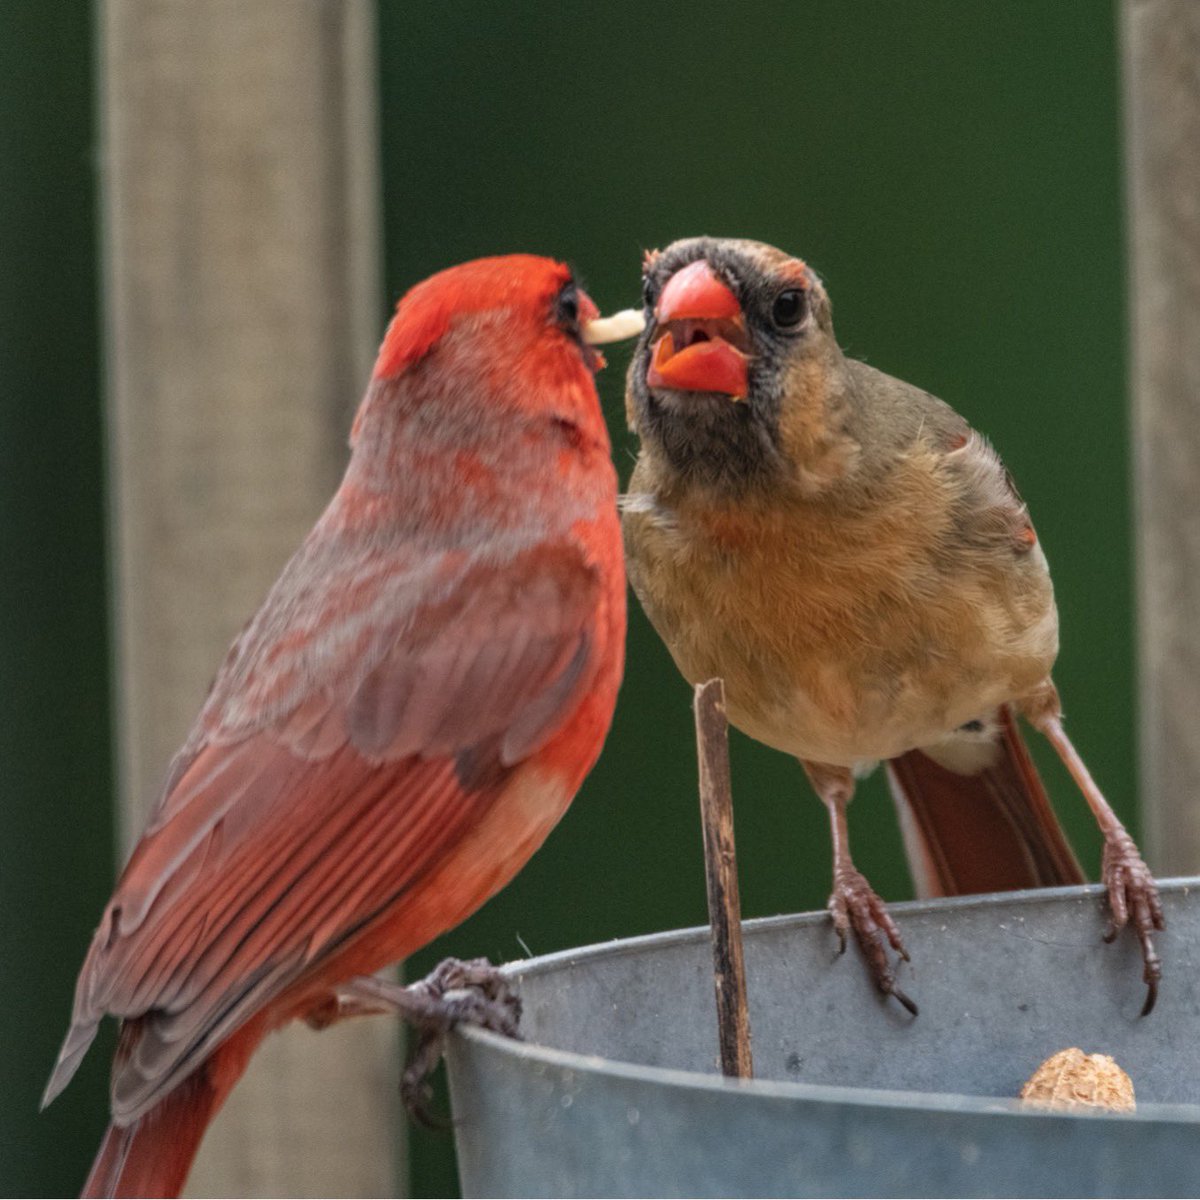 One of the cutest things I’ve seen in a while 😍

#trans_artists #trans_photographer #Jnyx #lovebirds #cardinalbird